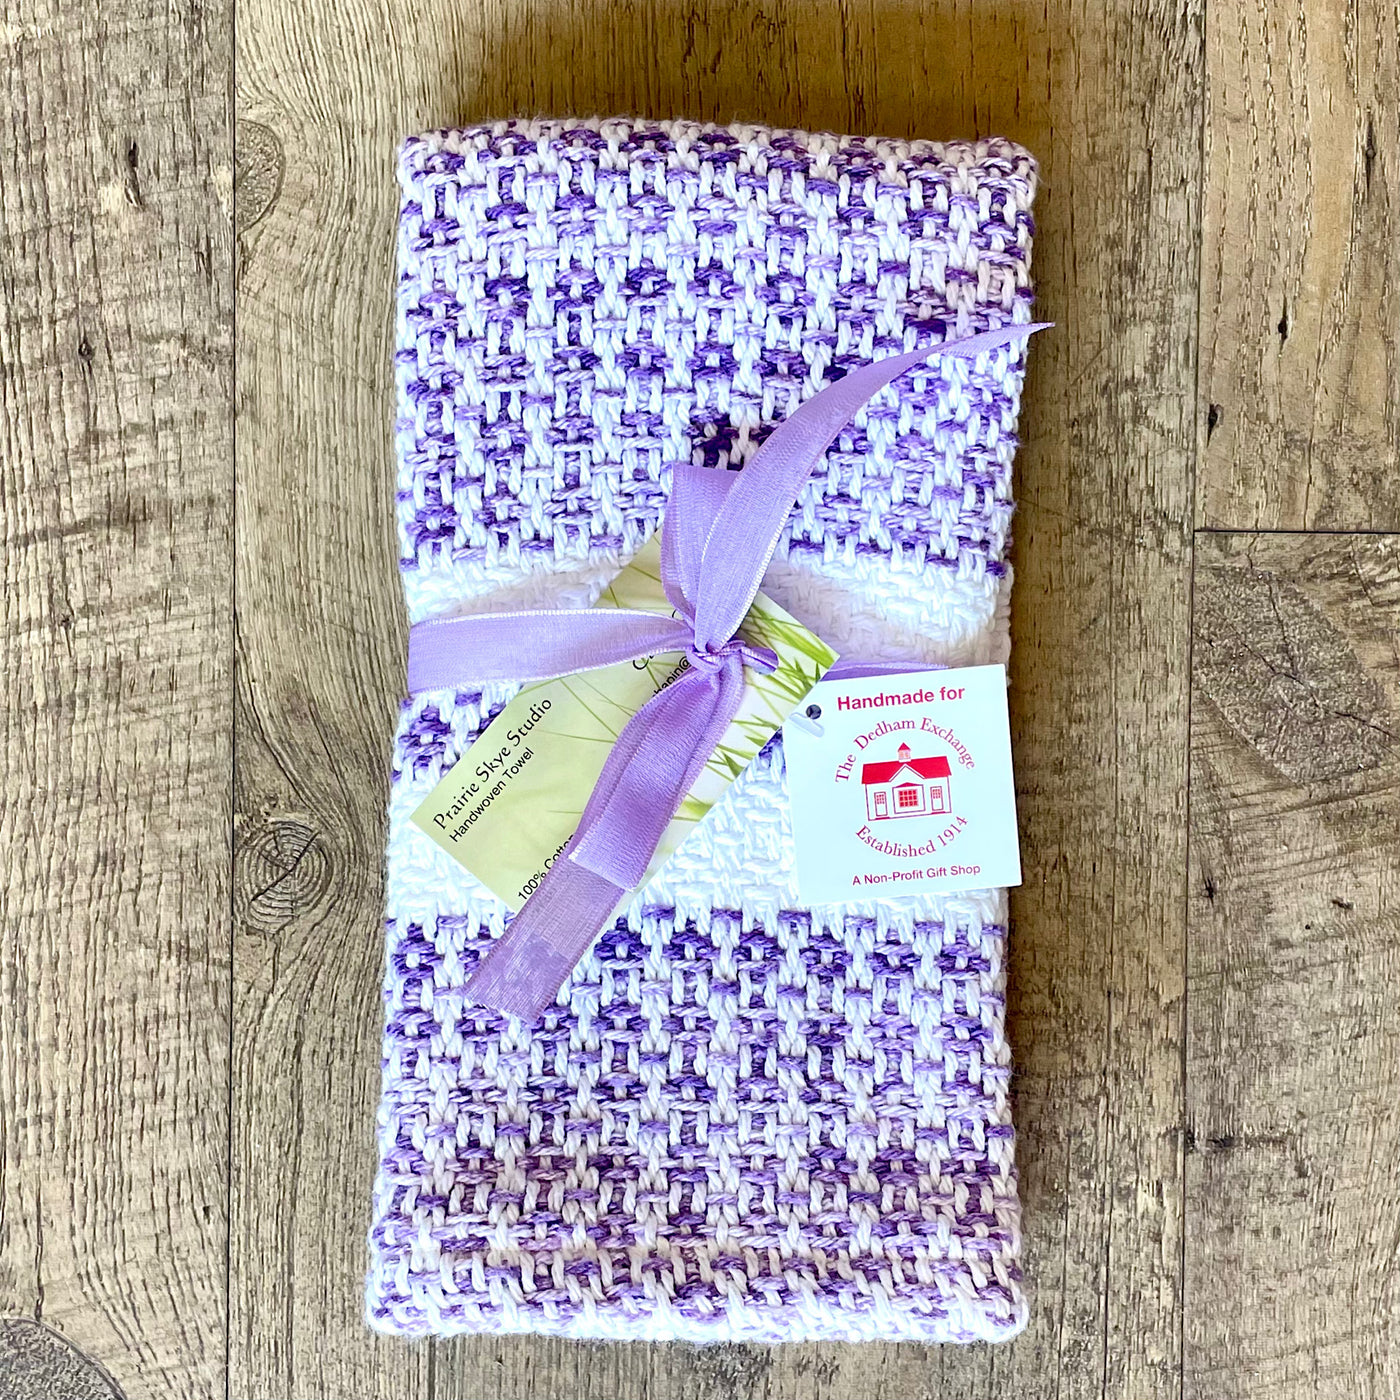 Handwoven Purple and White Hand Towel